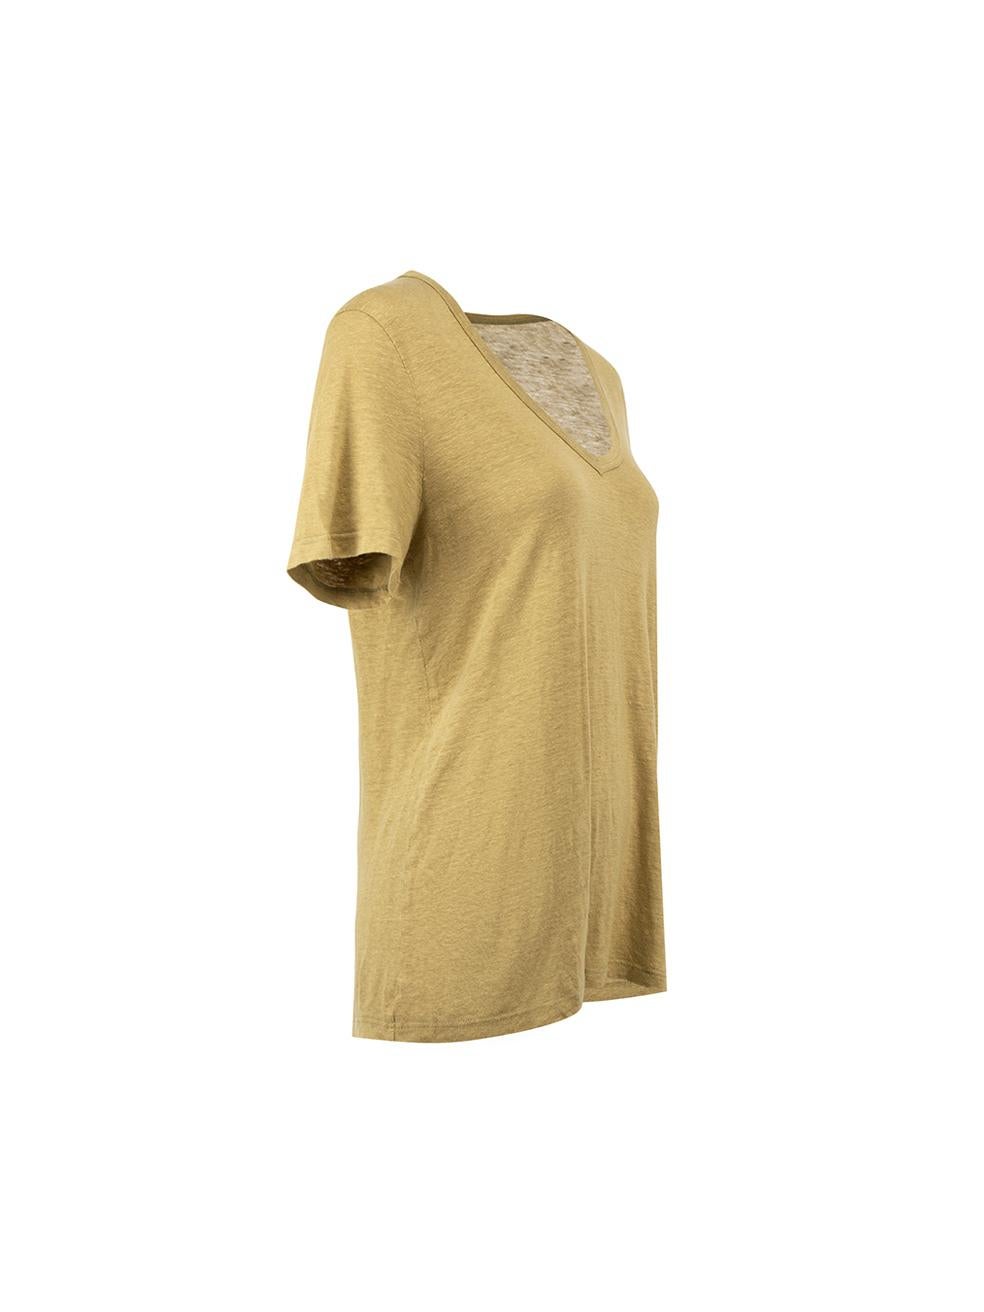 CONDITION is Never worn, with tags. No visible wear to t-shirt is evident on this new Isabel Marant Étoile designer resale item. 



Details


Khaki

Linen

Short sleeves T shirt

V neckline





Made in Tunisia



Composition

100% Linen



Care